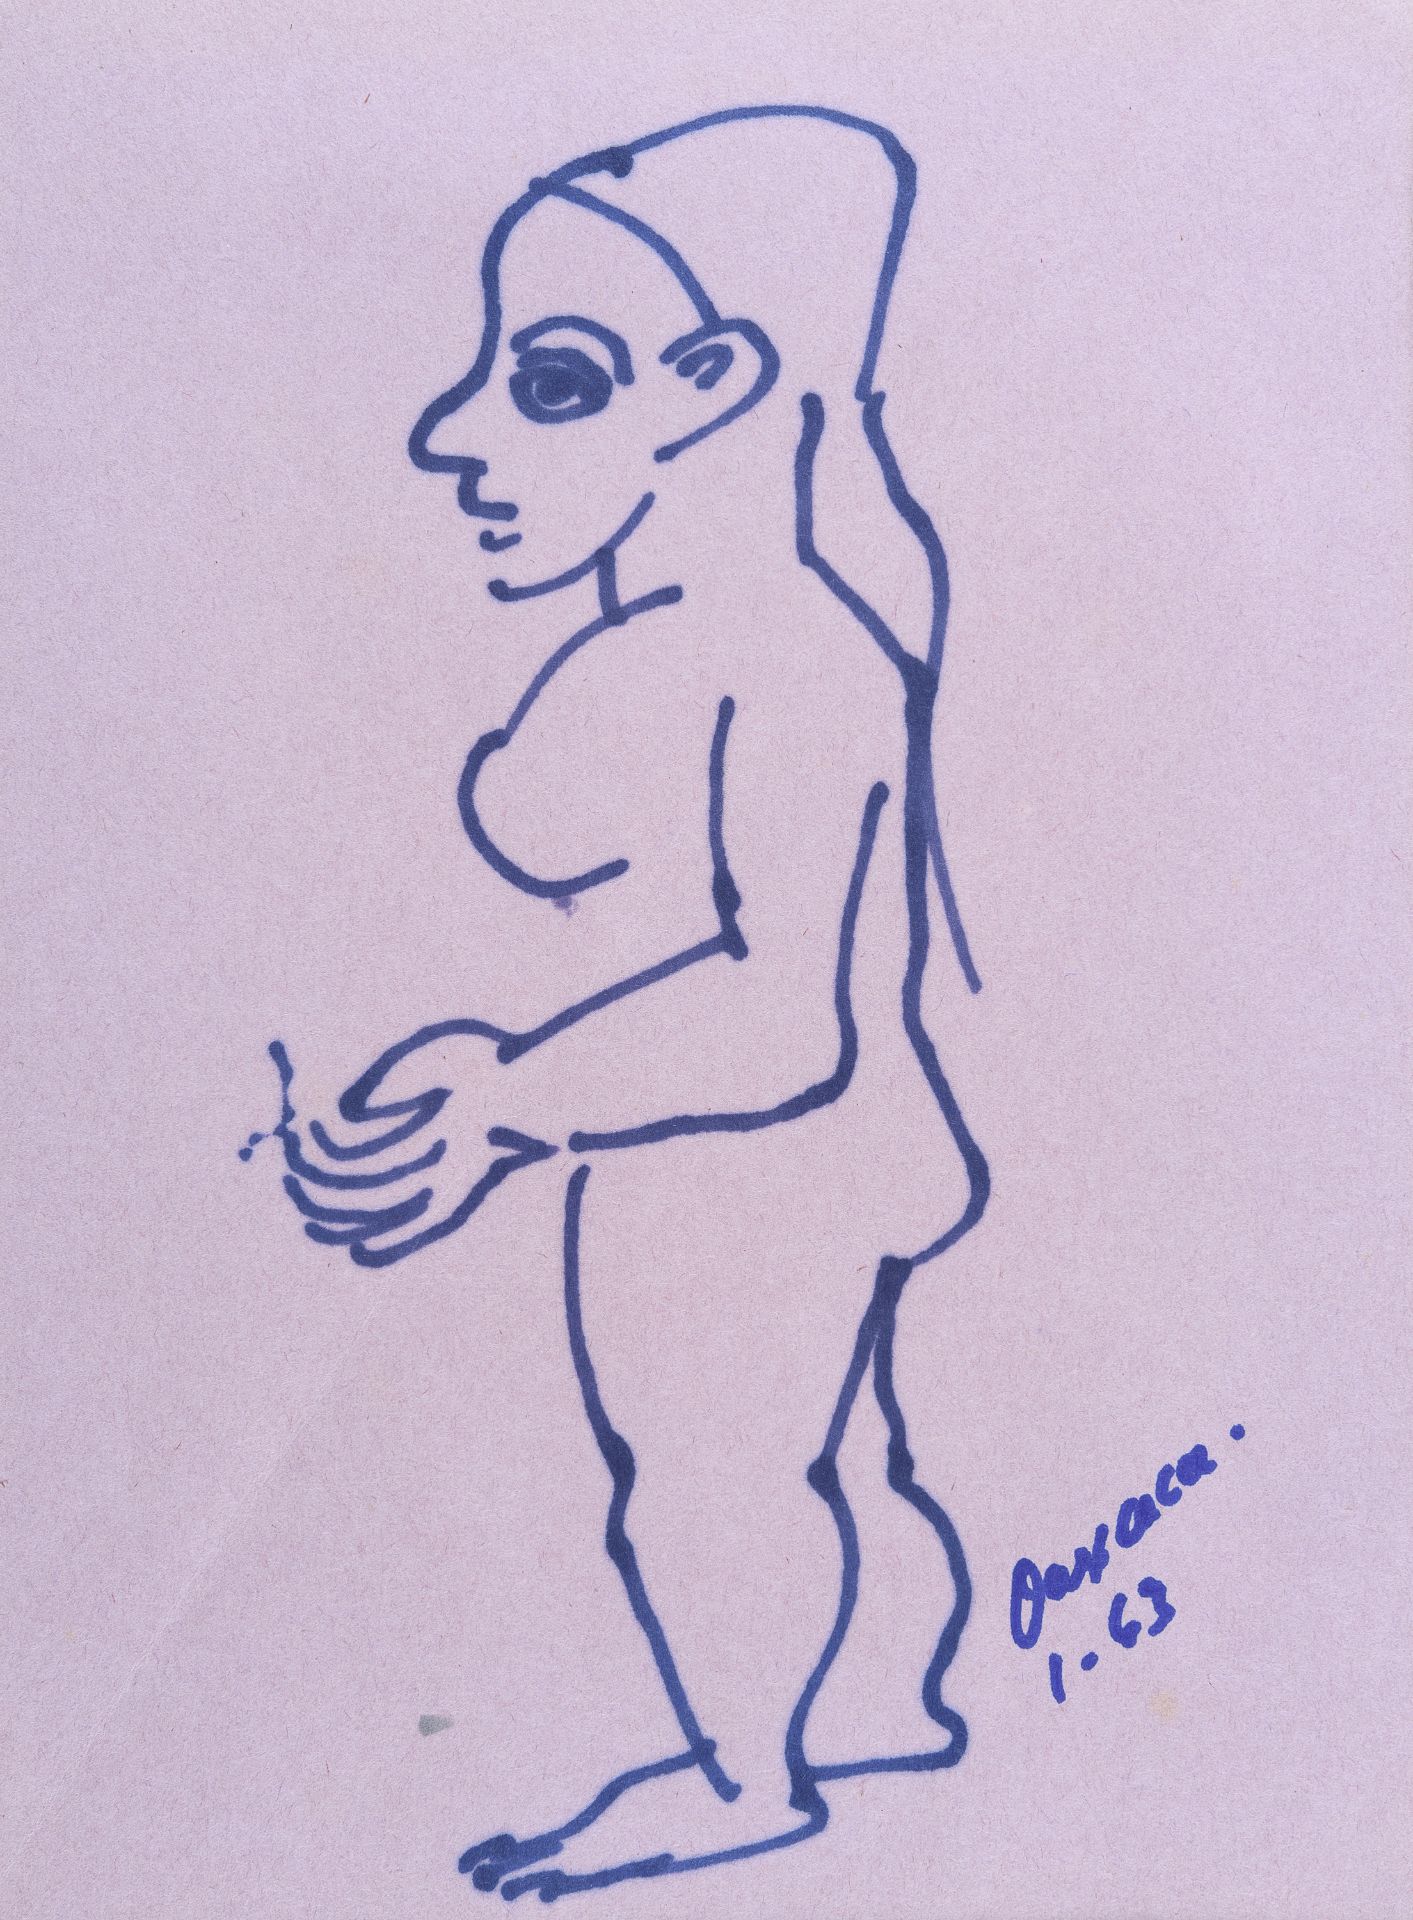 FELT PEN DRAWING OF A WOMAN BY ANTHONY QUINN 1963